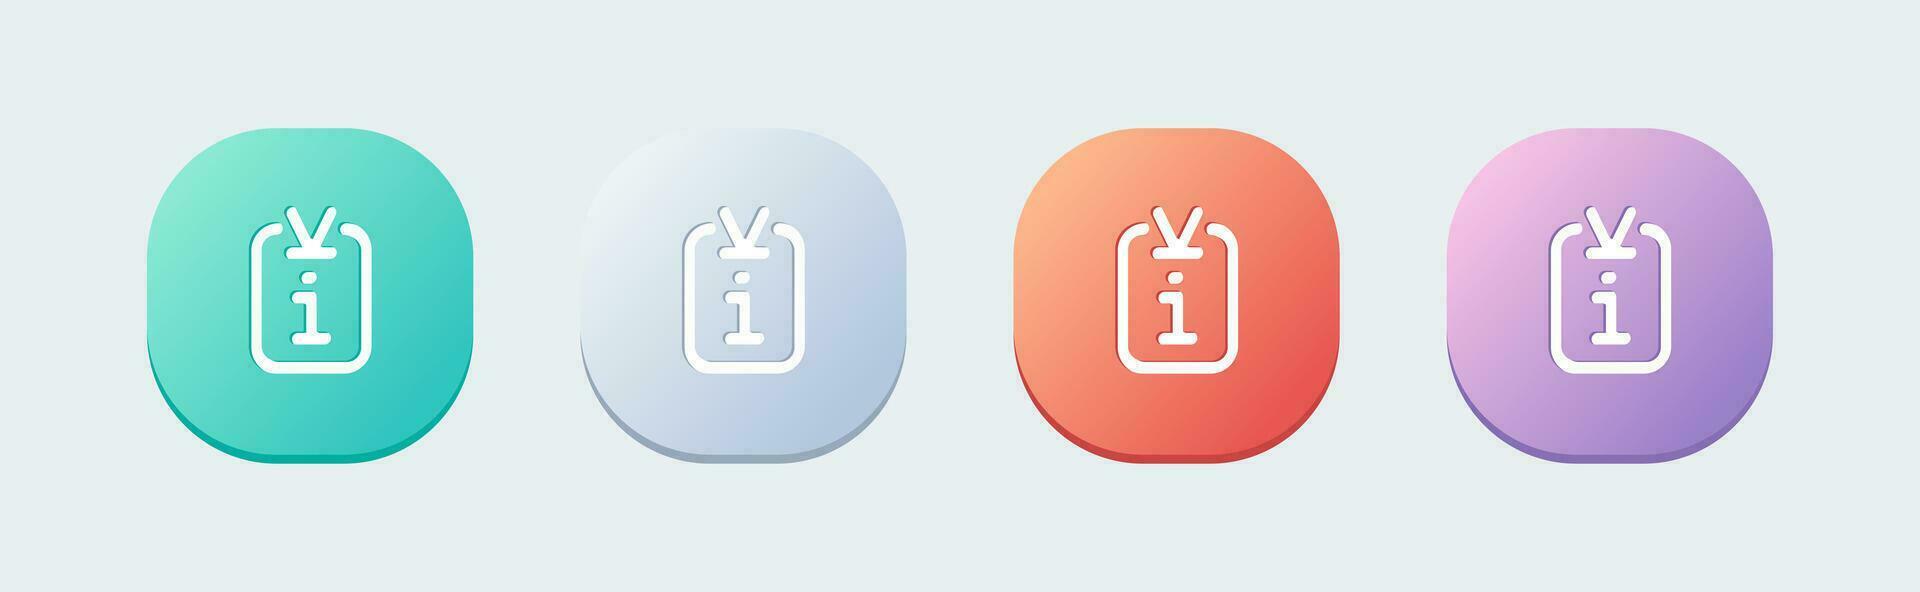 About line icon in flat design style. Info signs vector illustration.